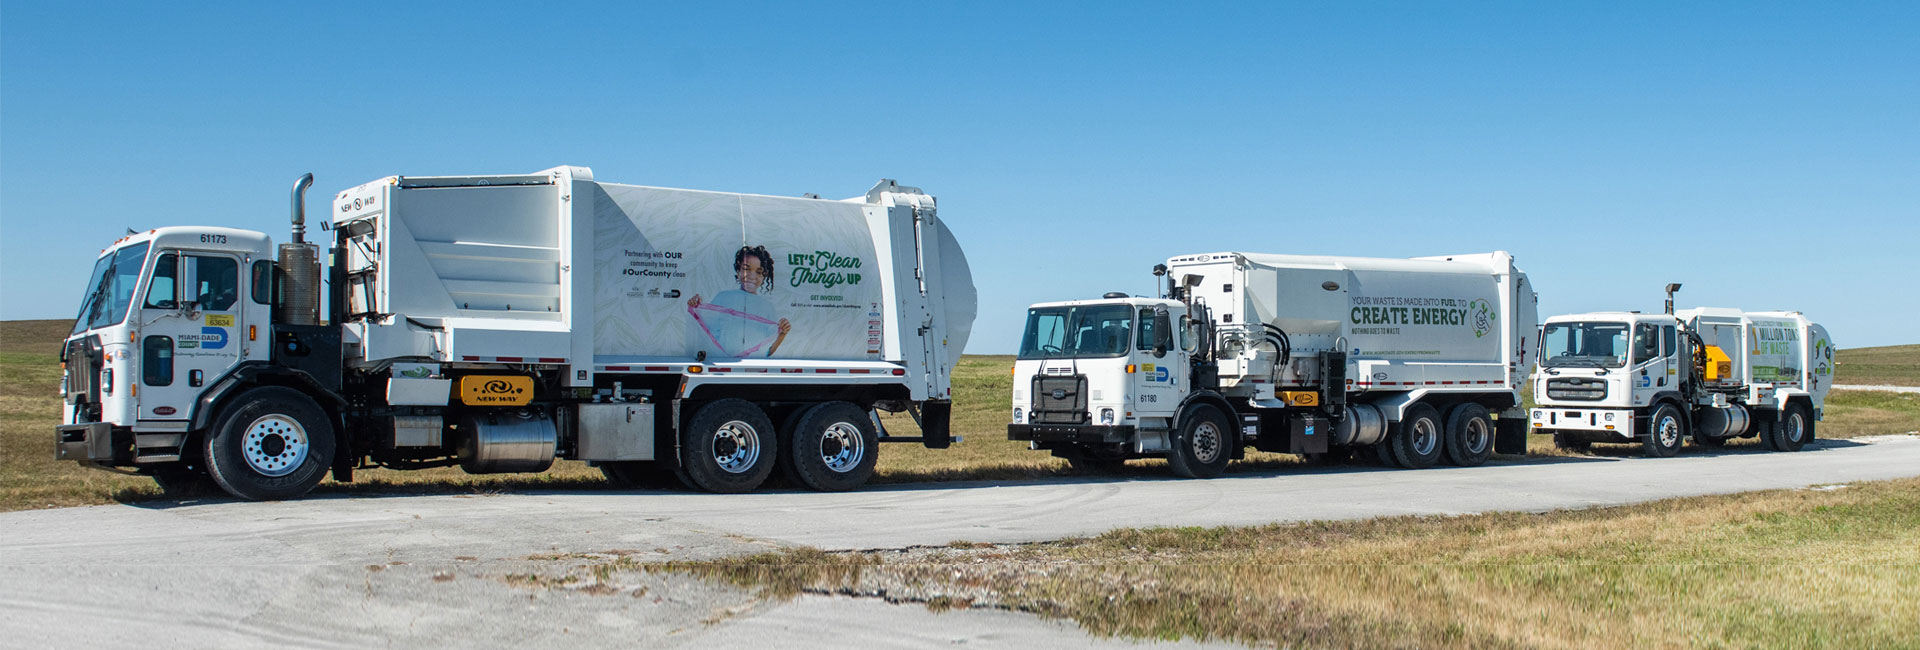 MiamiDade County Department of Solid Waste Management Holiday Waste